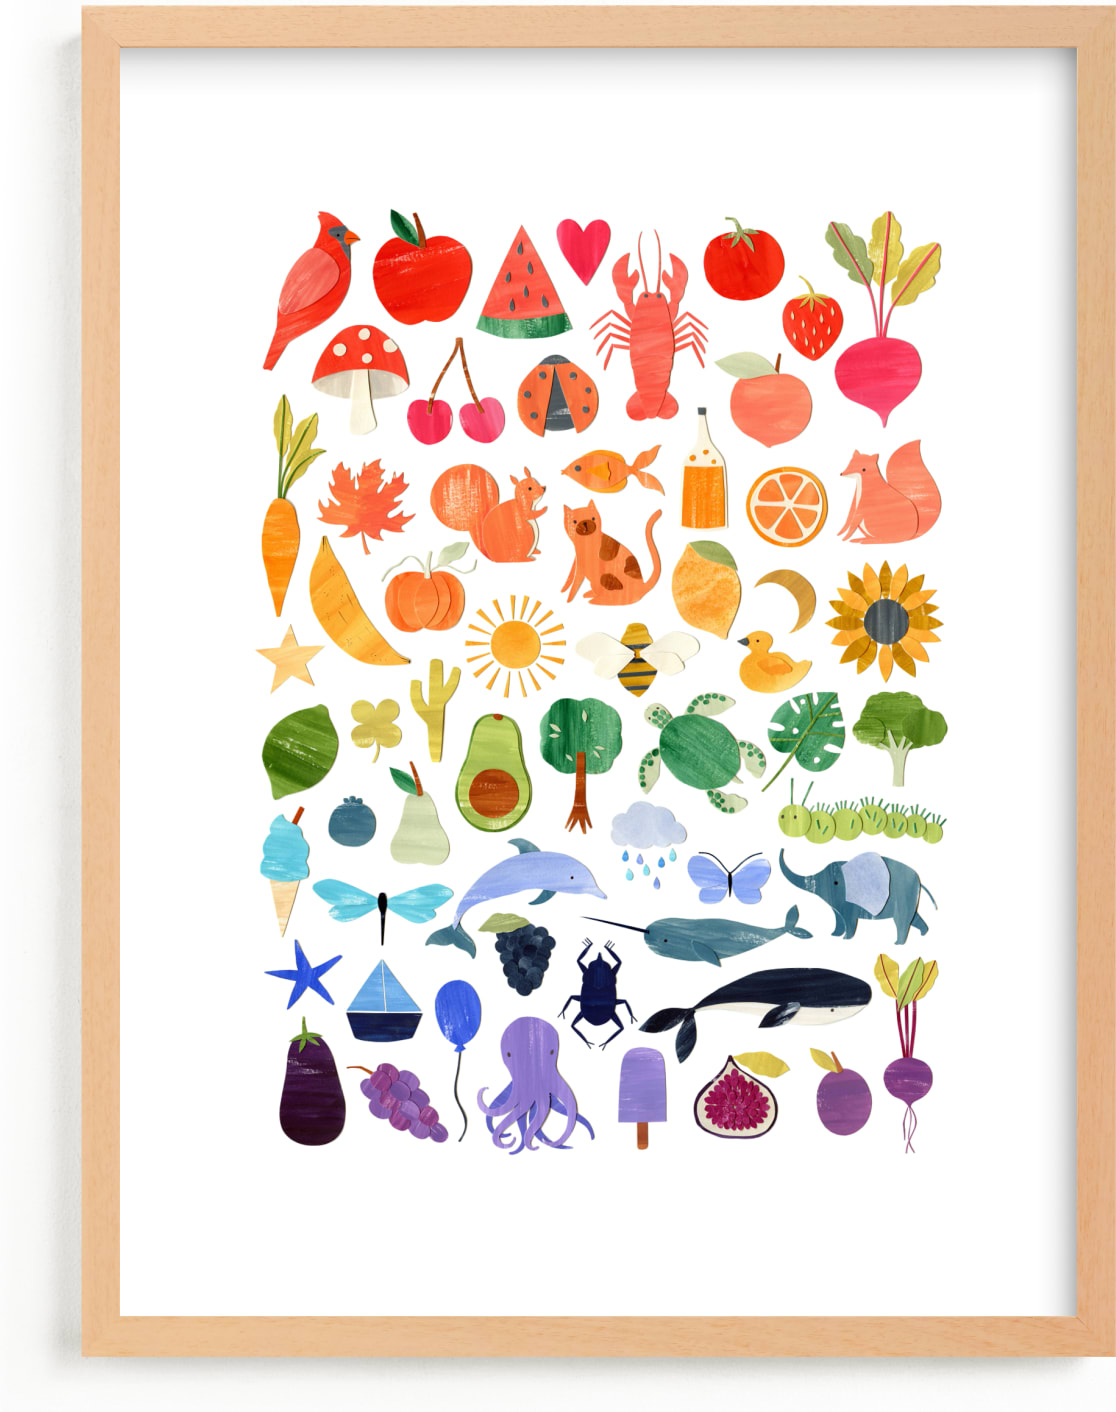 This is a colorful kids wall art by Sarah Knight called paper rainbow.